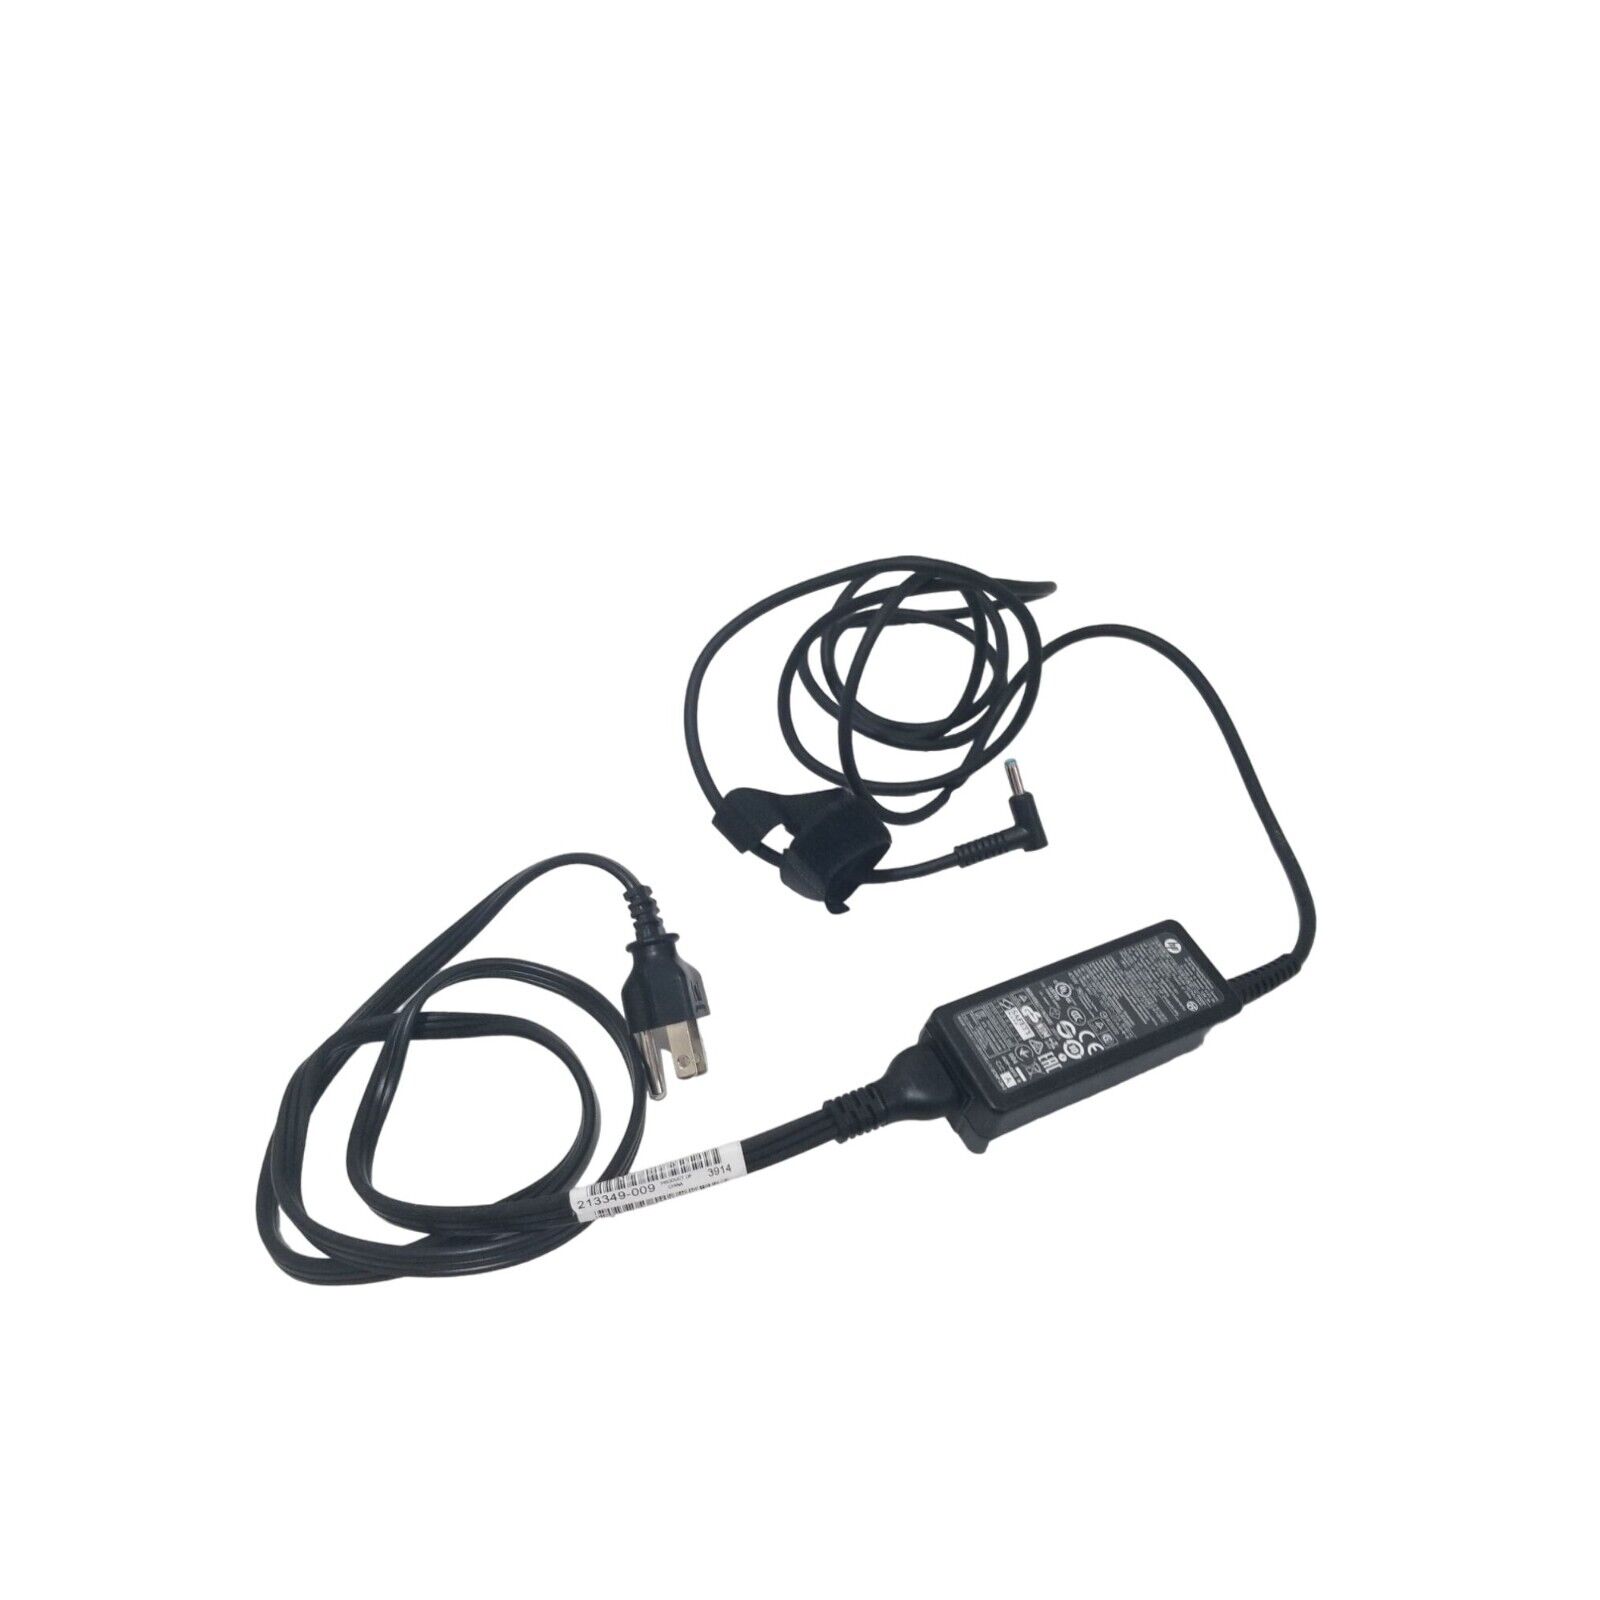 HP Laptop Charger Two Piece Part No. : 740015-003